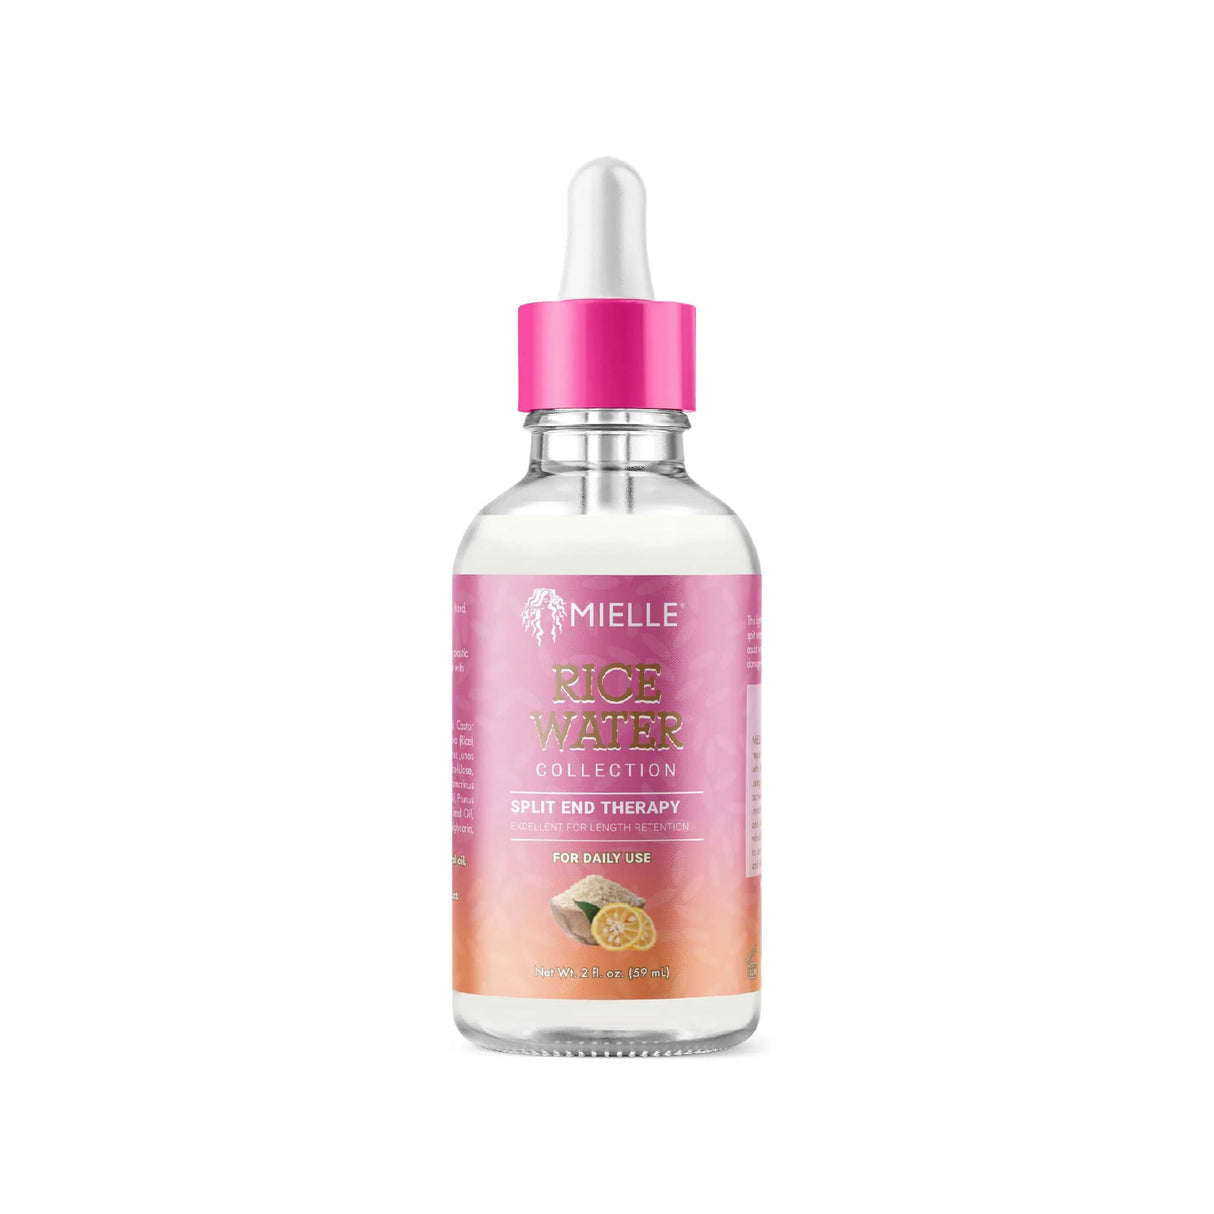 Mielle® Rice Water Split End Therapy Oil